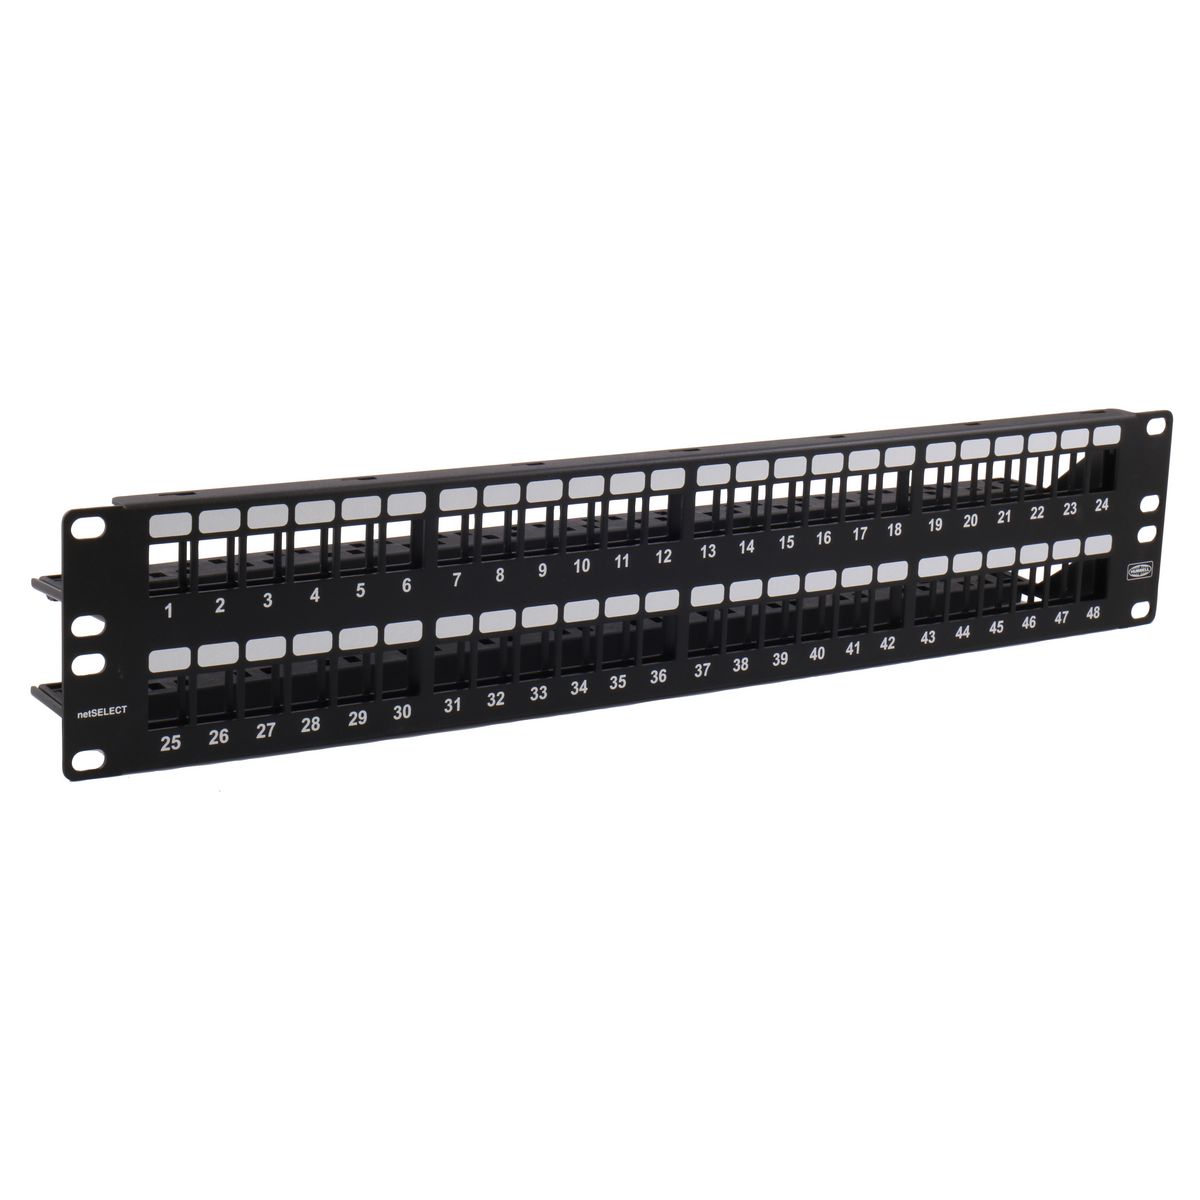 Hubbell Premise Wiring Products, Copper Solutions, Patch Panel,Unloaded, NetSelect, 48-Pair, 19